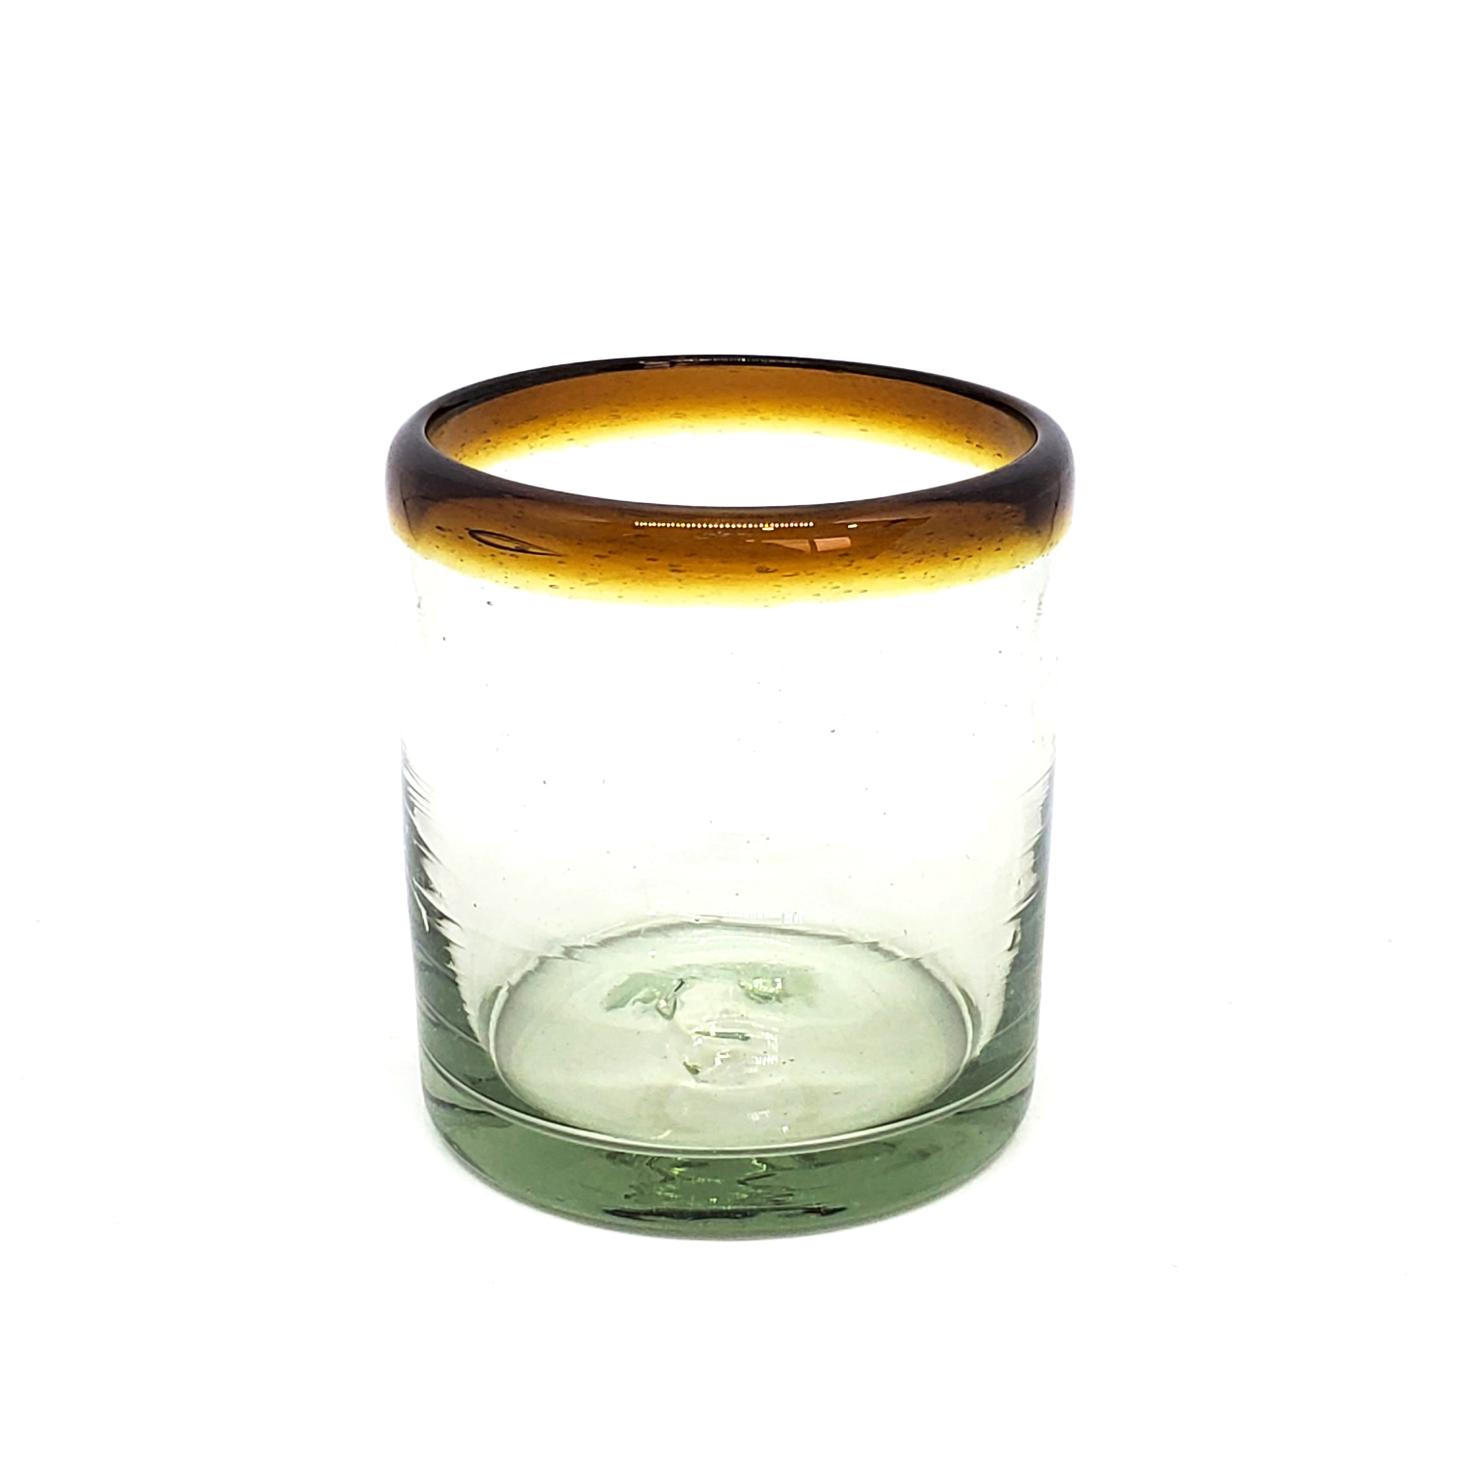 Wholesale Amber Rim Glassware / Amber Rim 8 oz DOF Rock Glasses  / These Double Old Fashioned glasses deliver a classic touch to your favorite drink on the rocks.